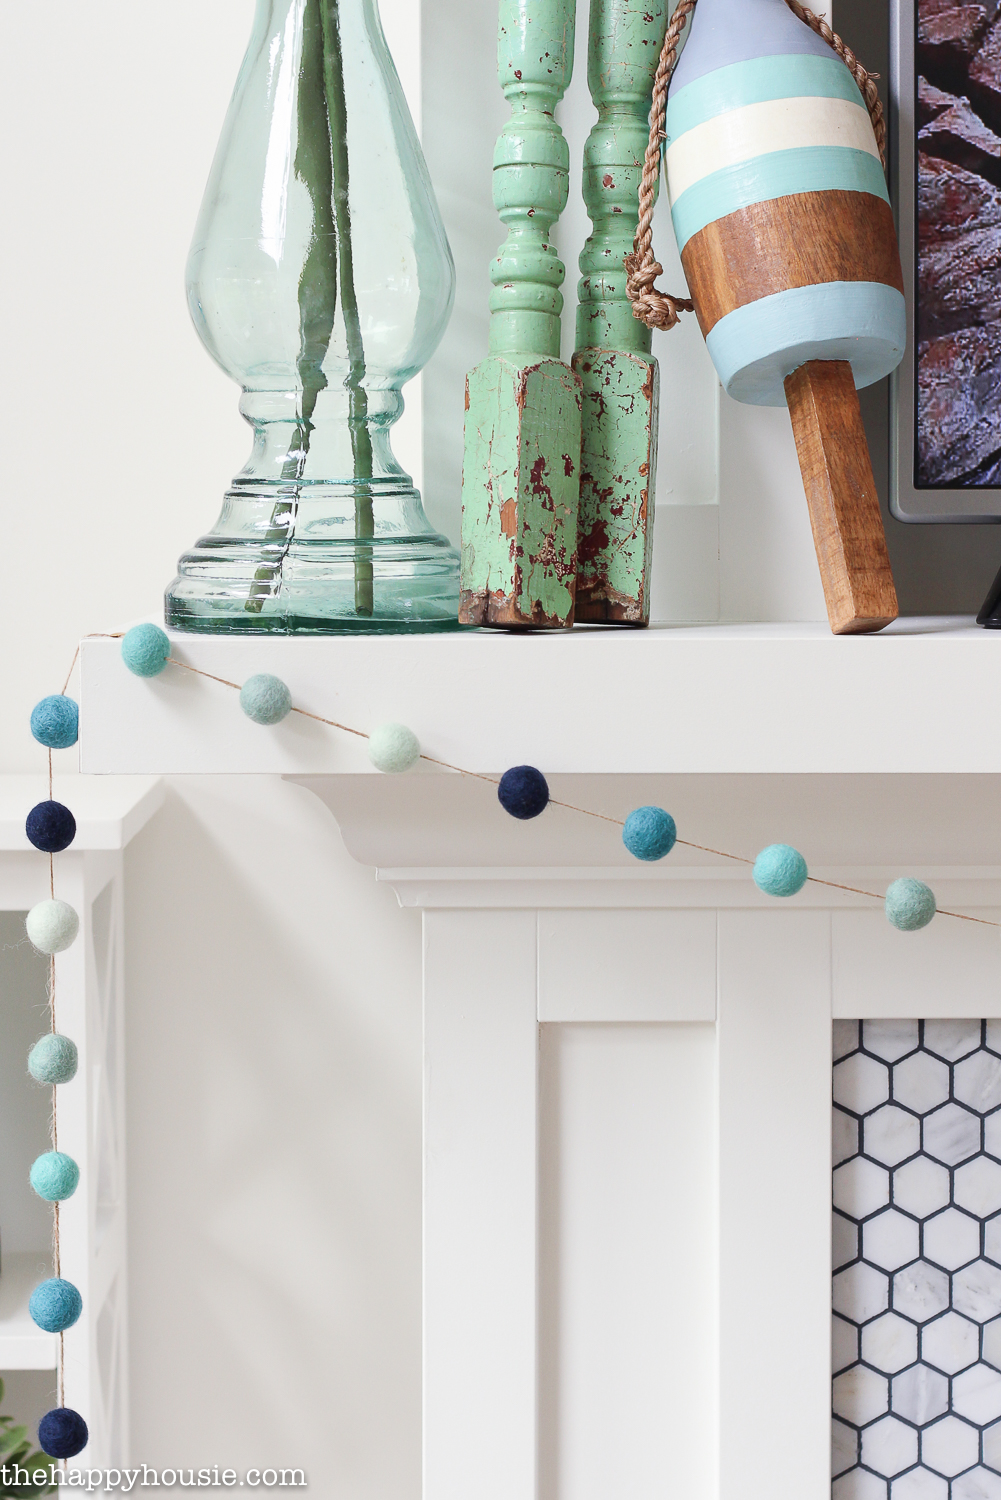 A white fireplace mantel with the garland hanging in front of it.